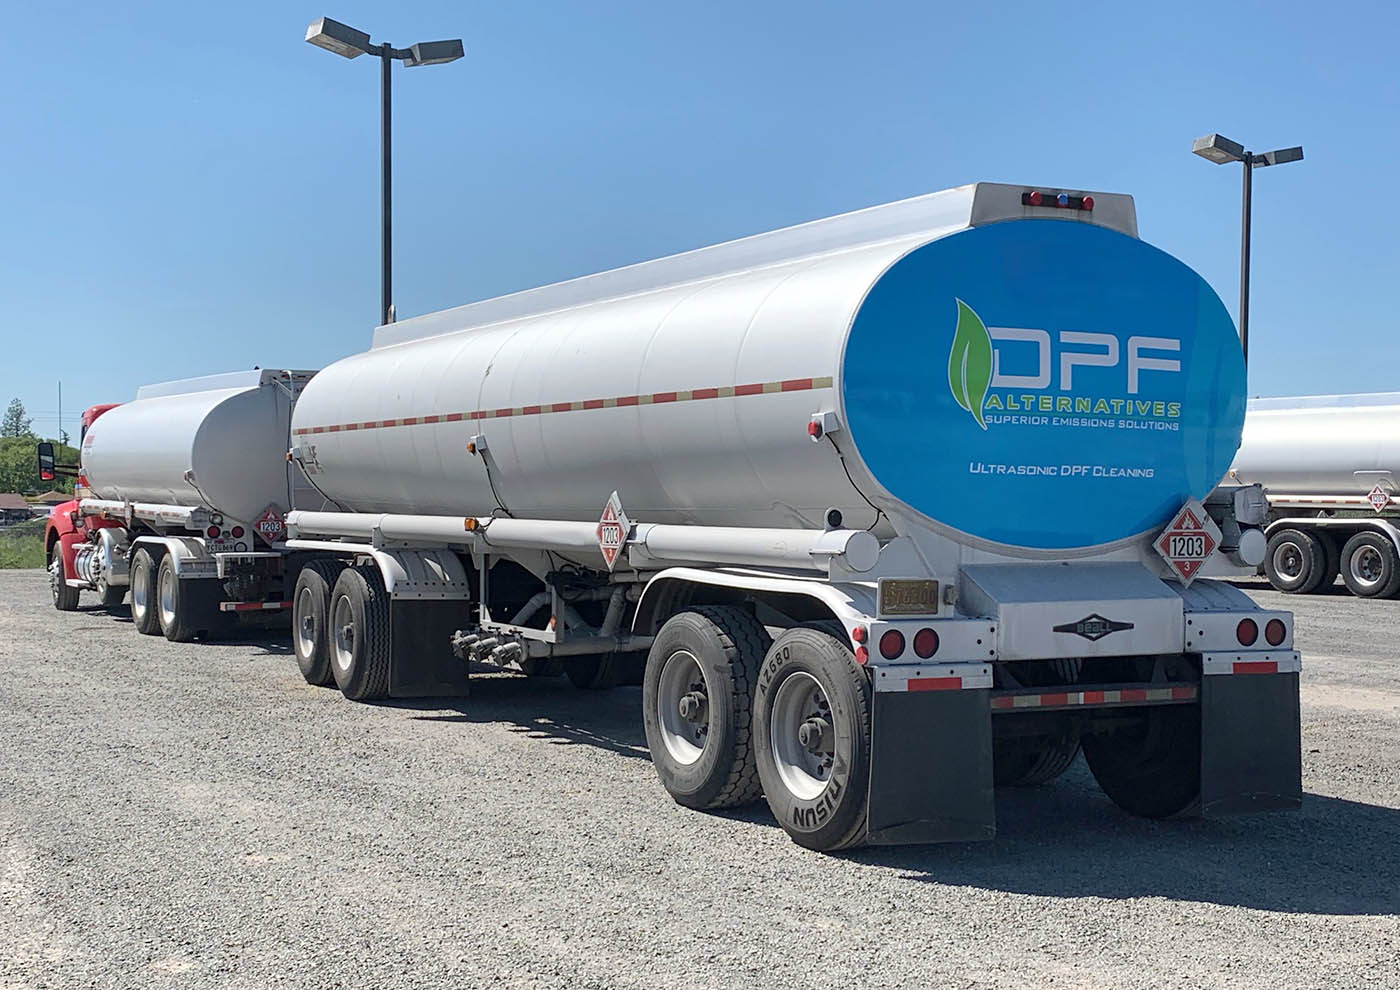 Back of a clean, large, reflective semi truck rig, contact DPF Alternatives for a DPF cleaning in Dallas.